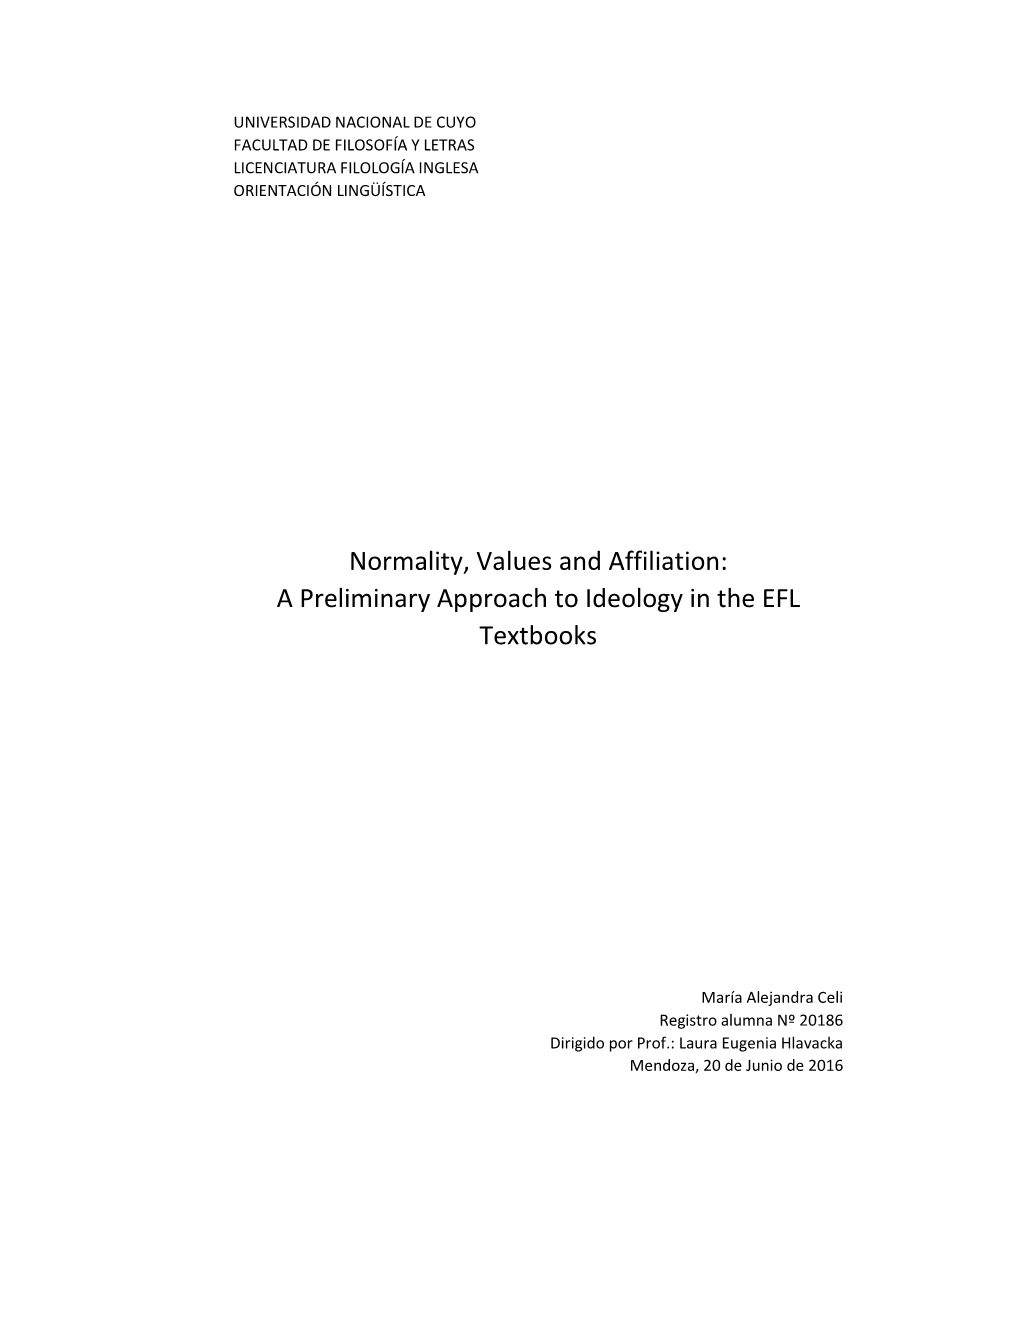 Normality, Values and Affiliation: a Preliminary Approach to Ideology in the EFL Textbooks